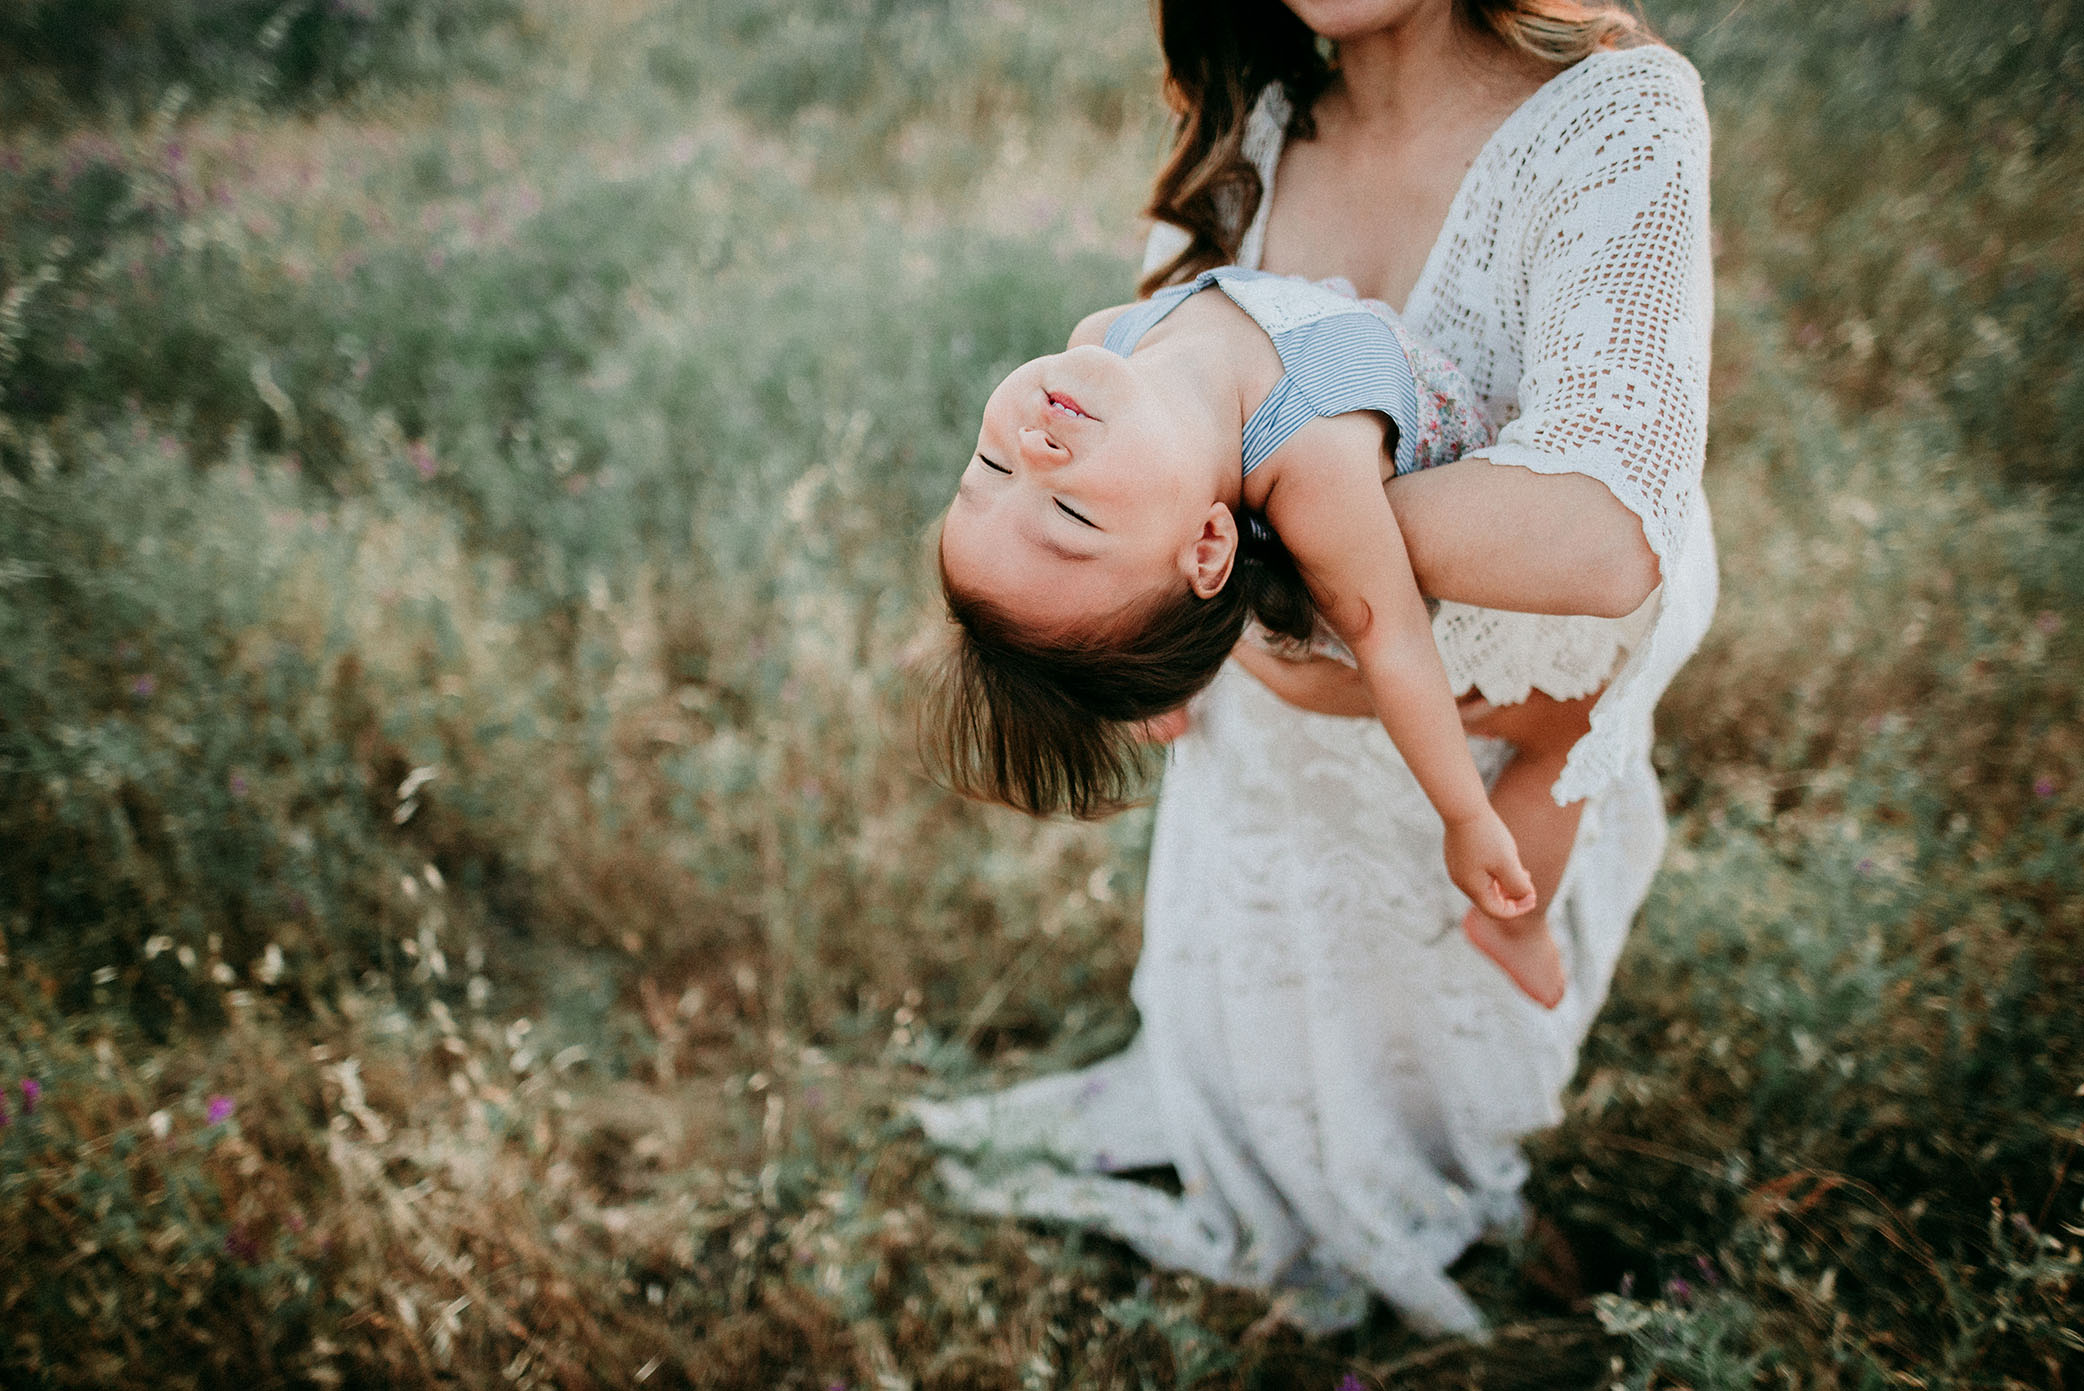 Toddler completely relaxed in mother's arms captured by Sweet Beginnings Photography by Stephanie